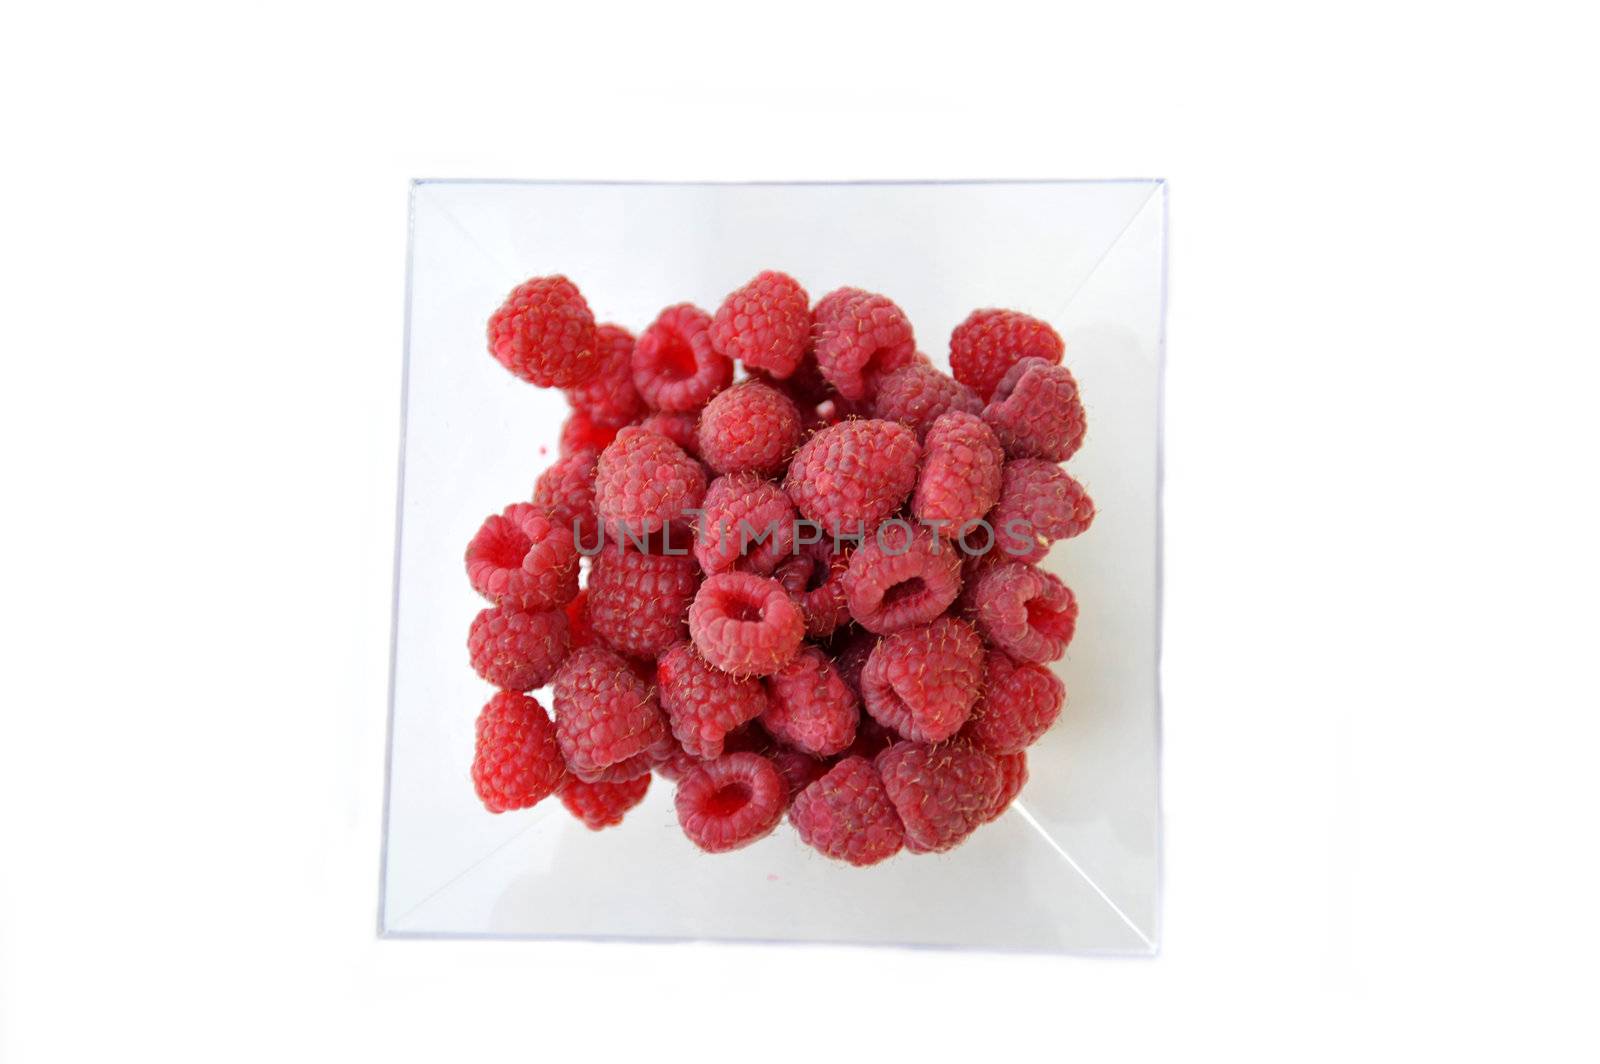 Raspberries on a white background by cynoclub